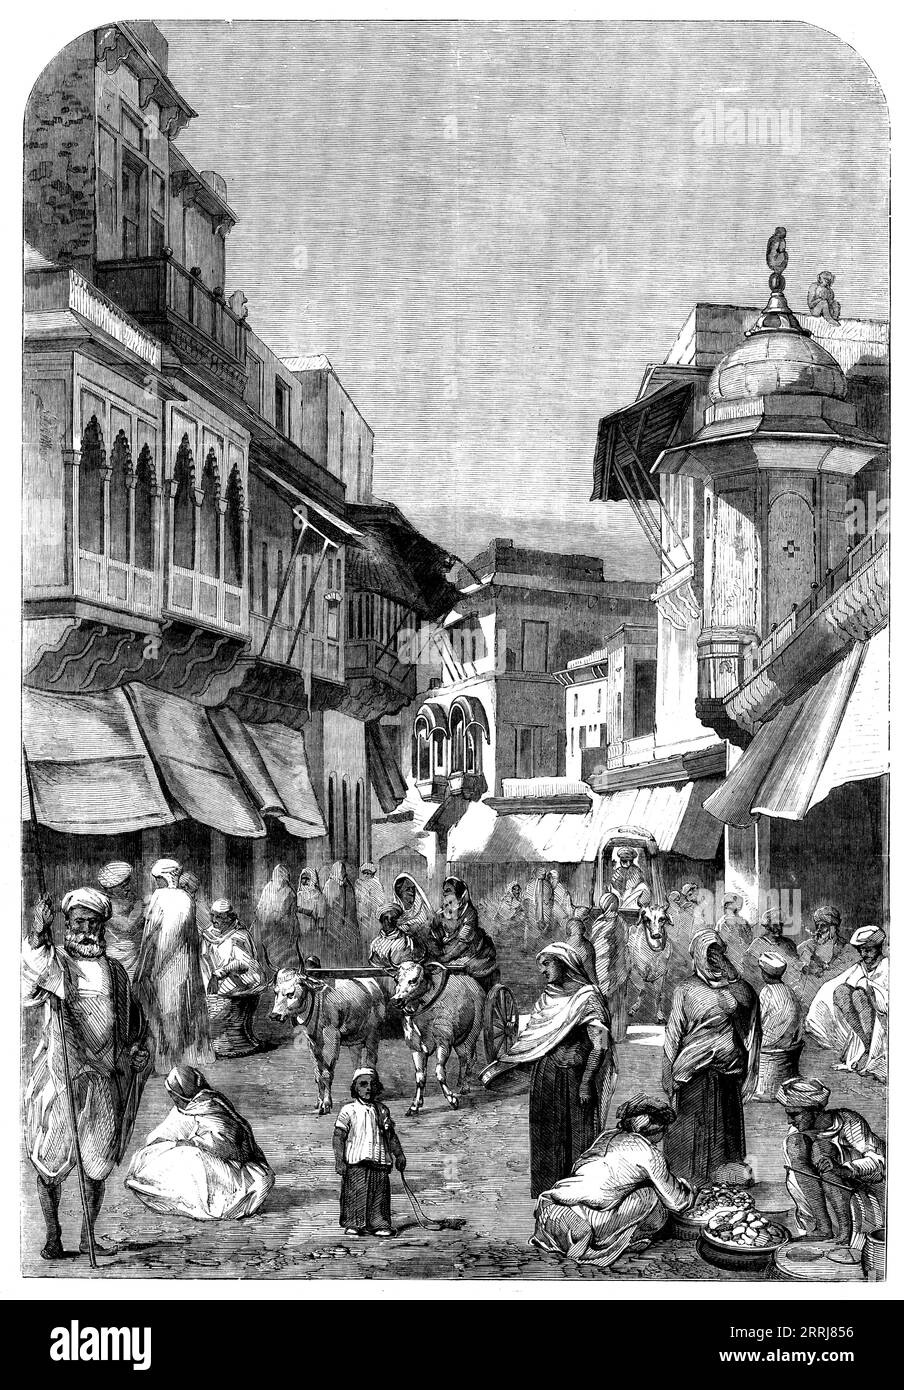 The Main Street of Agra, 1858. 'This city, once the capital of India, is now much decayed, and consists of little more than this one street, running parallel to the Jumna, the rest being mere mud hovels. From the river it must formerly have presented a very striking appearance, being lined with palaces of the nobles, built during the reign of the great Acbar. Their ruins are still massive and imposing; and some tombs, in good preservation, are models of beauty, both in construction and material...The civil and military lines of the Europeans adjoined the city, but were entirely destroyed when Stock Photo